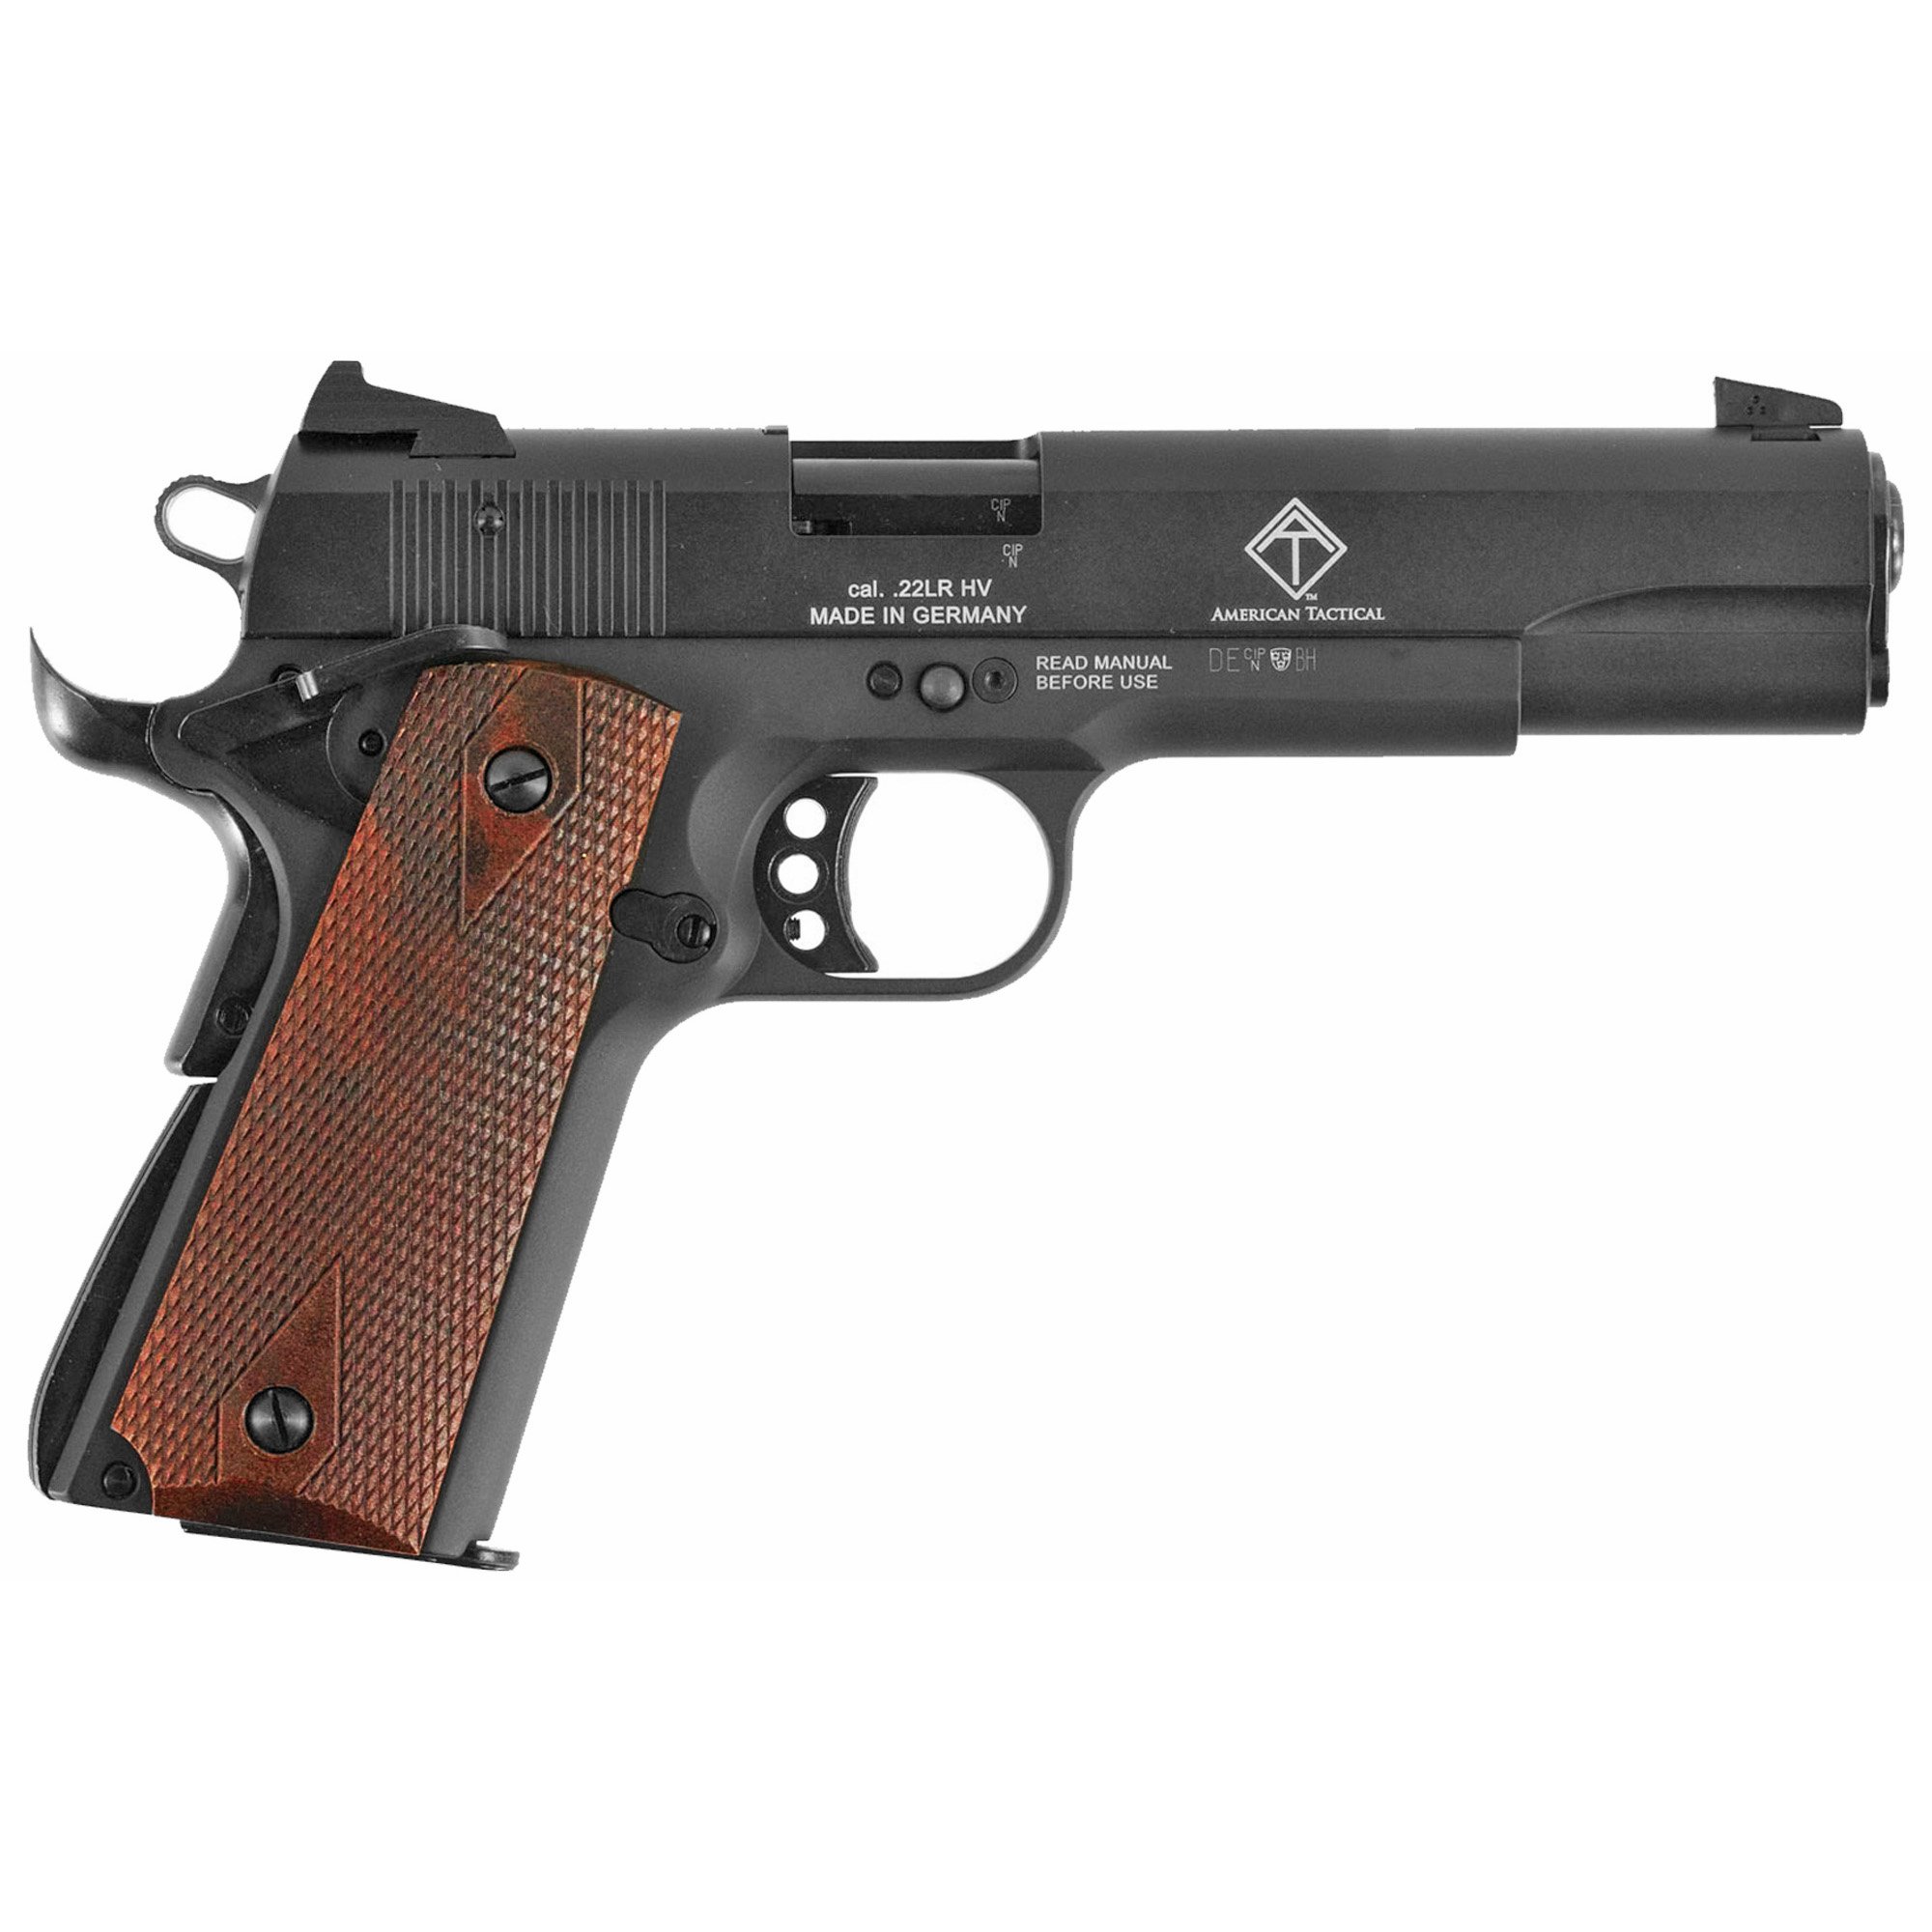 American Tactical, M1911, Semi-automatic, Metal Frame Pistol, Full Size, 22LR, 5" Barrel, Threaded, Alloy, Blued Finish, Wood Grips, 10 Rounds